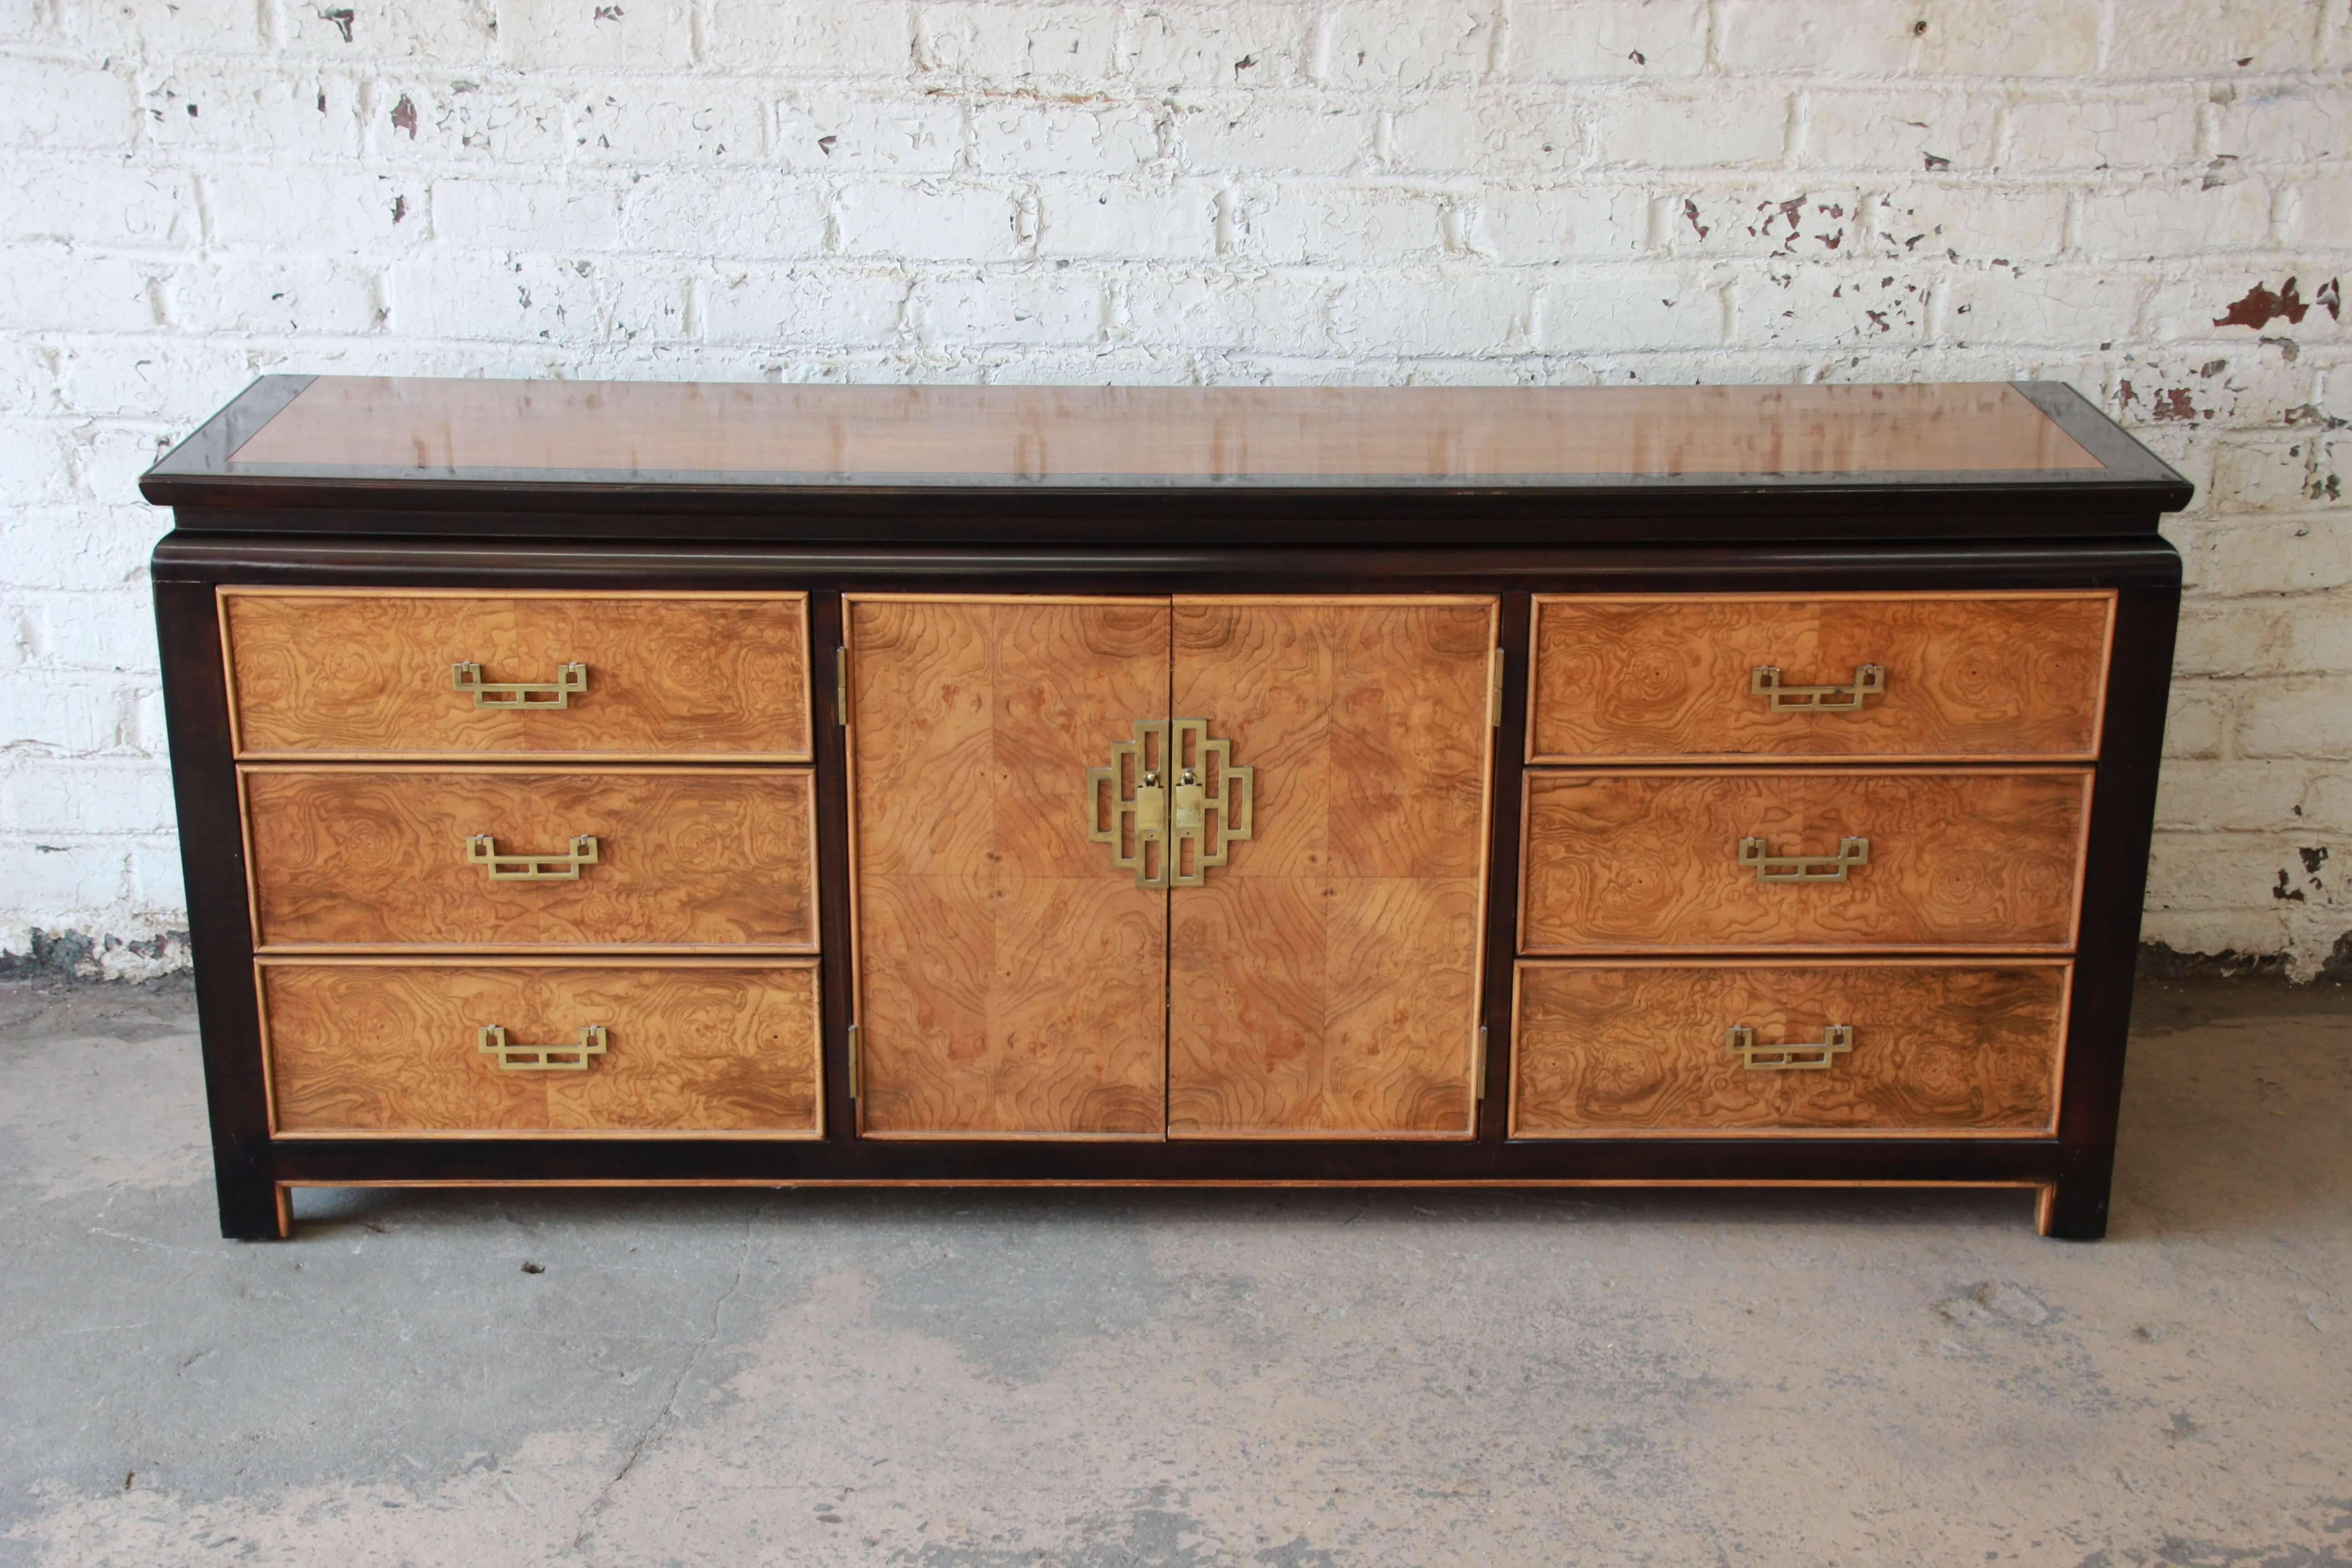 Offering a beautiful burl wood and black lacquered Chin Hua long dresser. The dresser has nice brass hardware and features nine large drawers that offer lots of room for storage. The centre cabinet doors open up to three smooth sliding drawers and